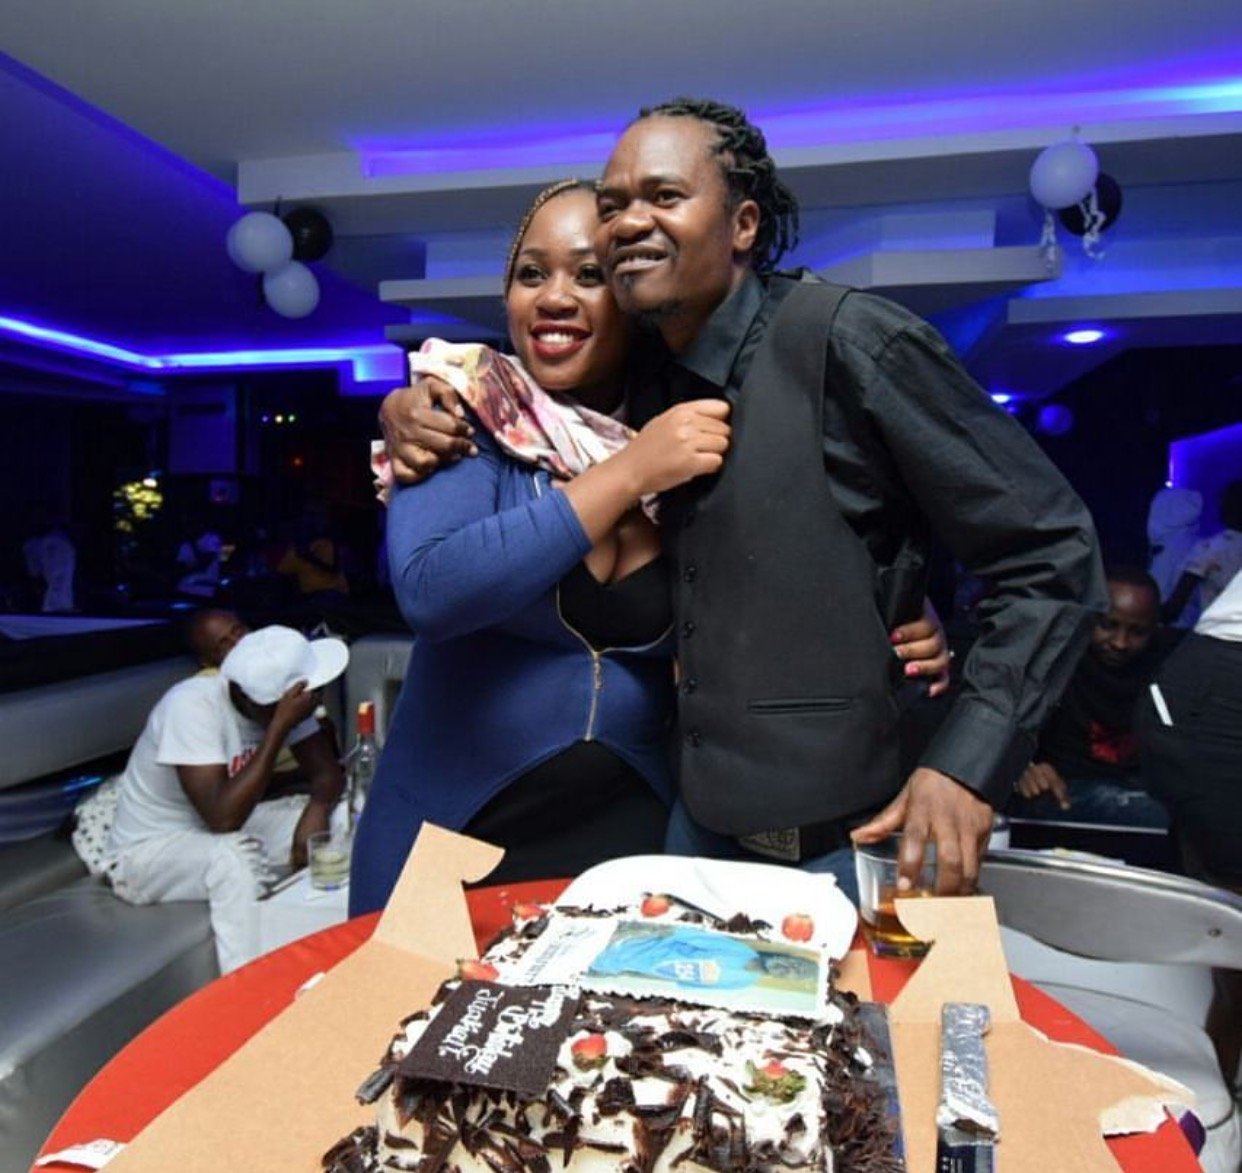 How Jua Cali celebrated his 38th birthday, checkout the lit photos from his bash